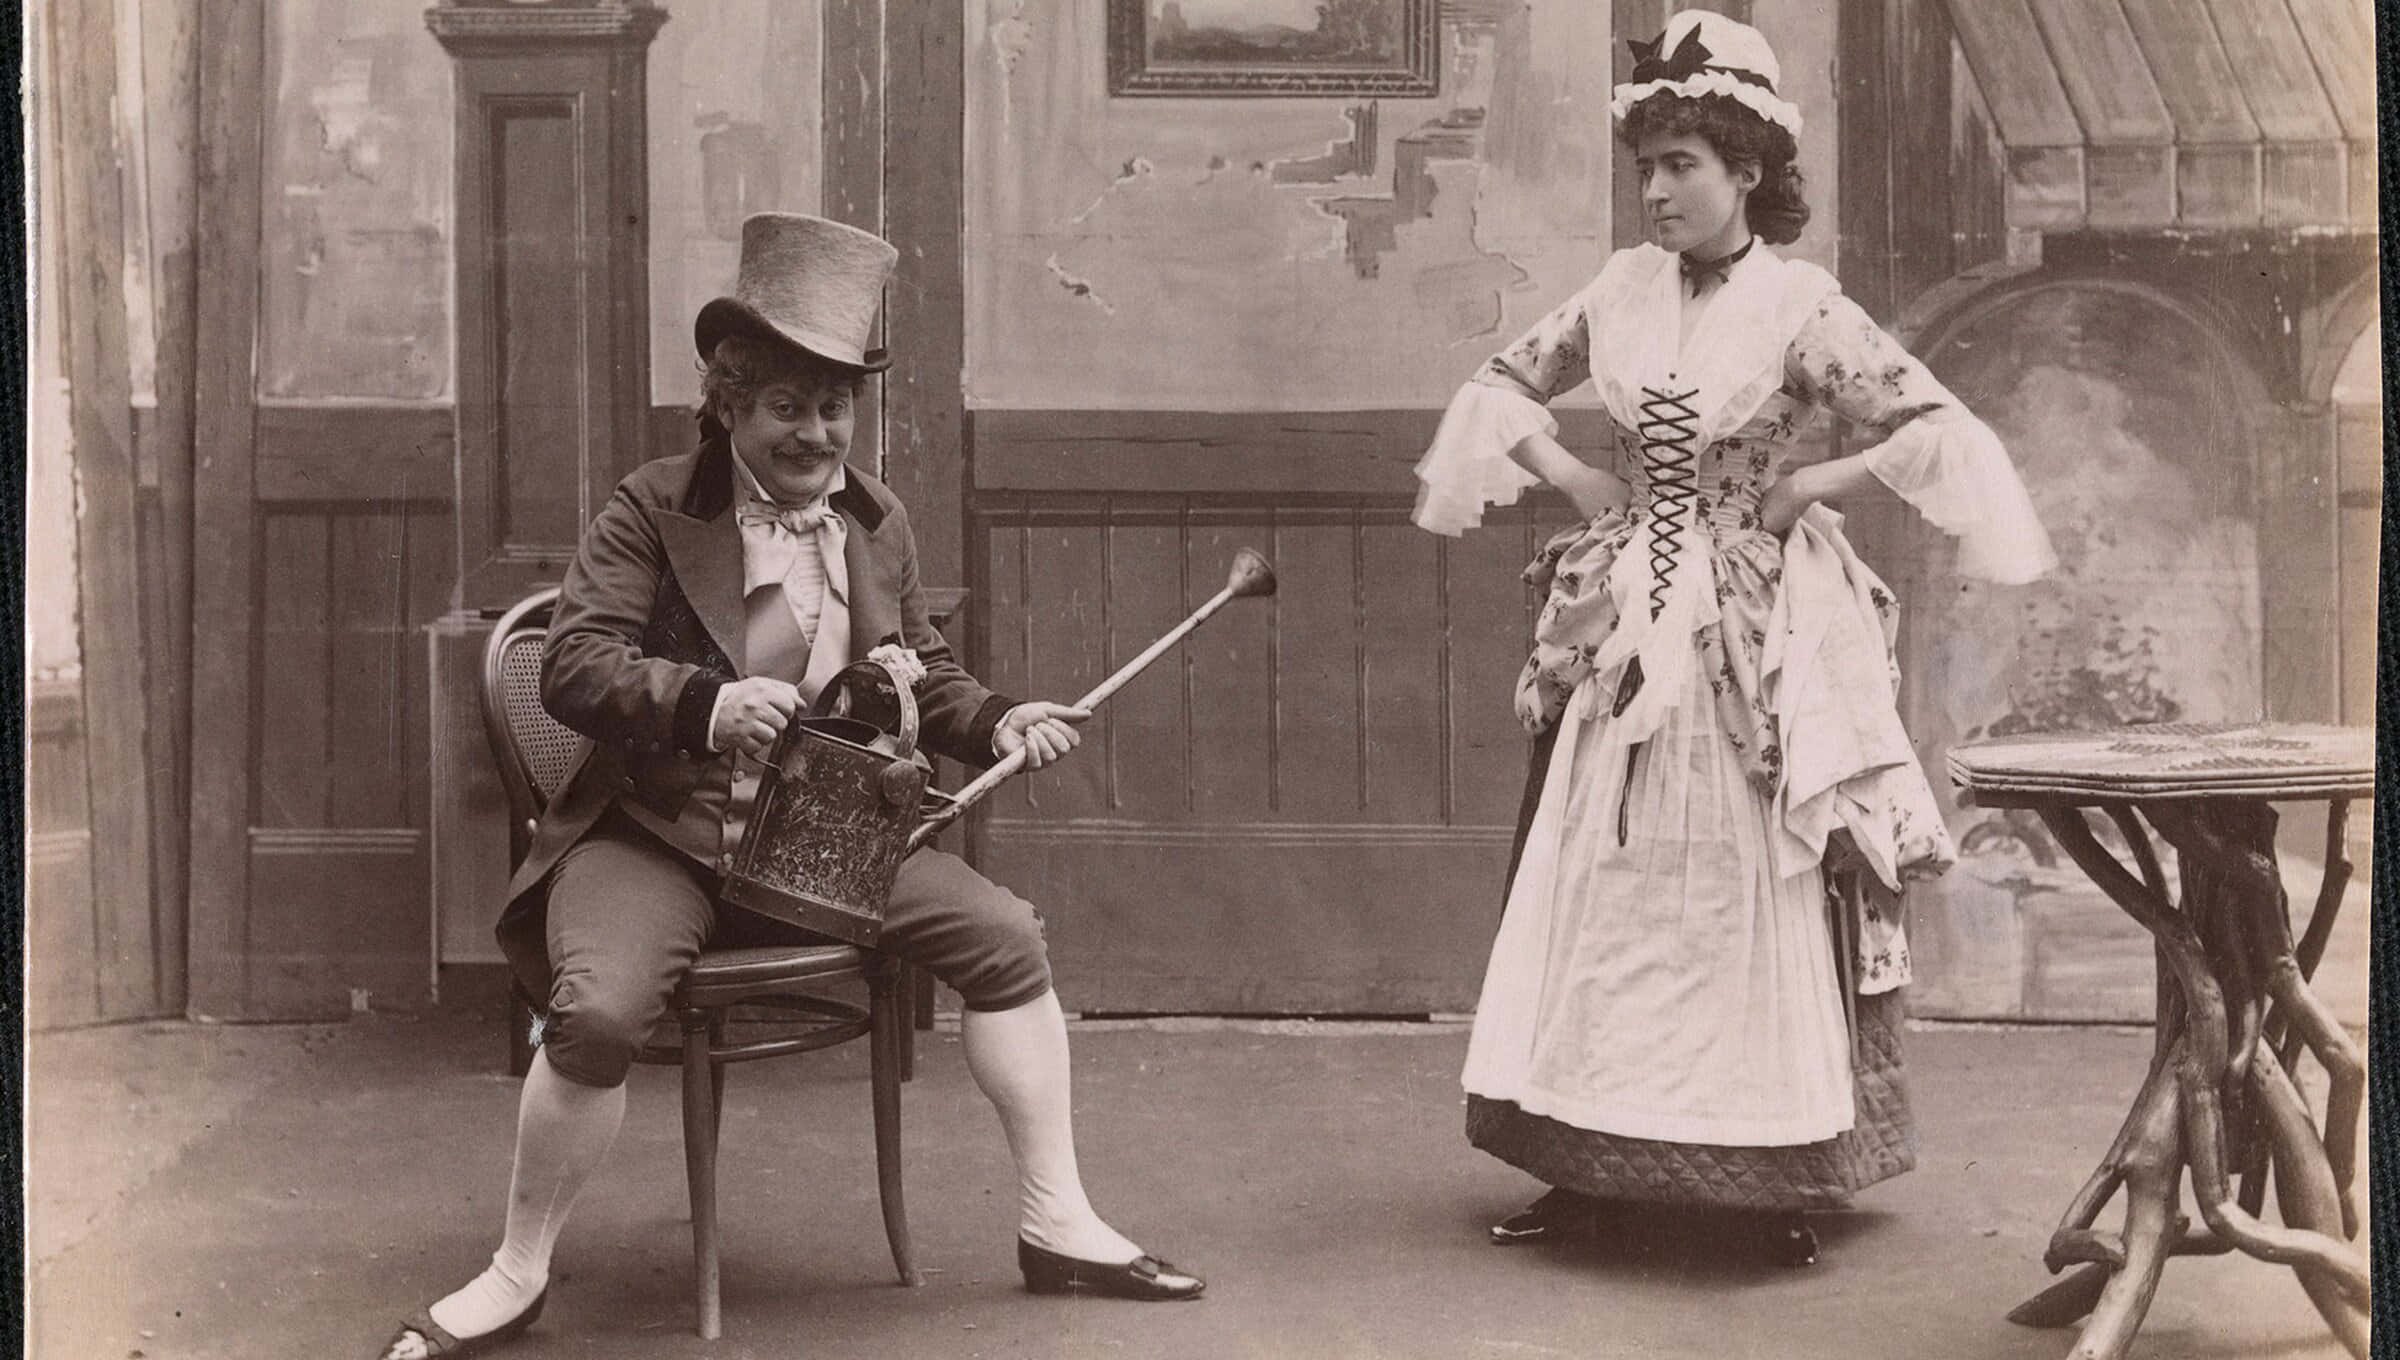 A Man And Woman In A Costume Playing A Musical Instrument